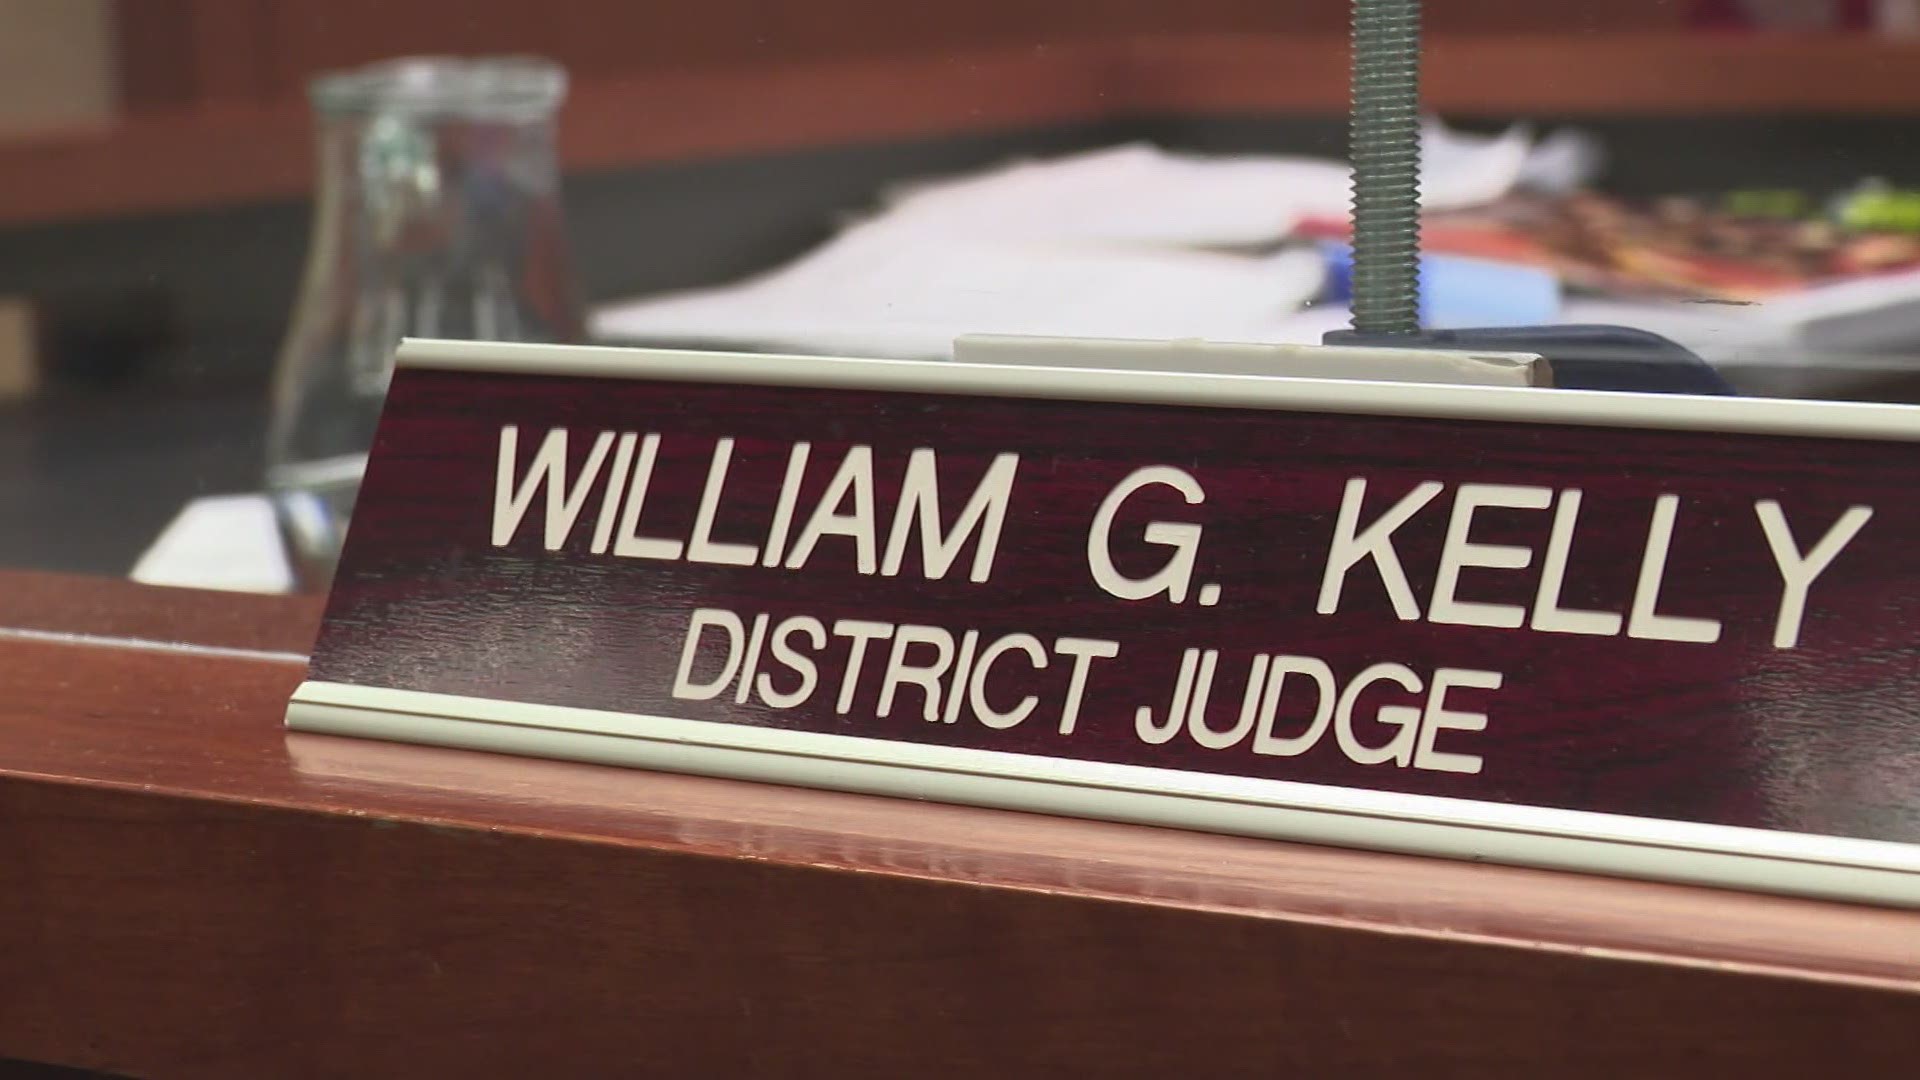 Kentwood #39 s first and only district court judge lays down gavel after 42